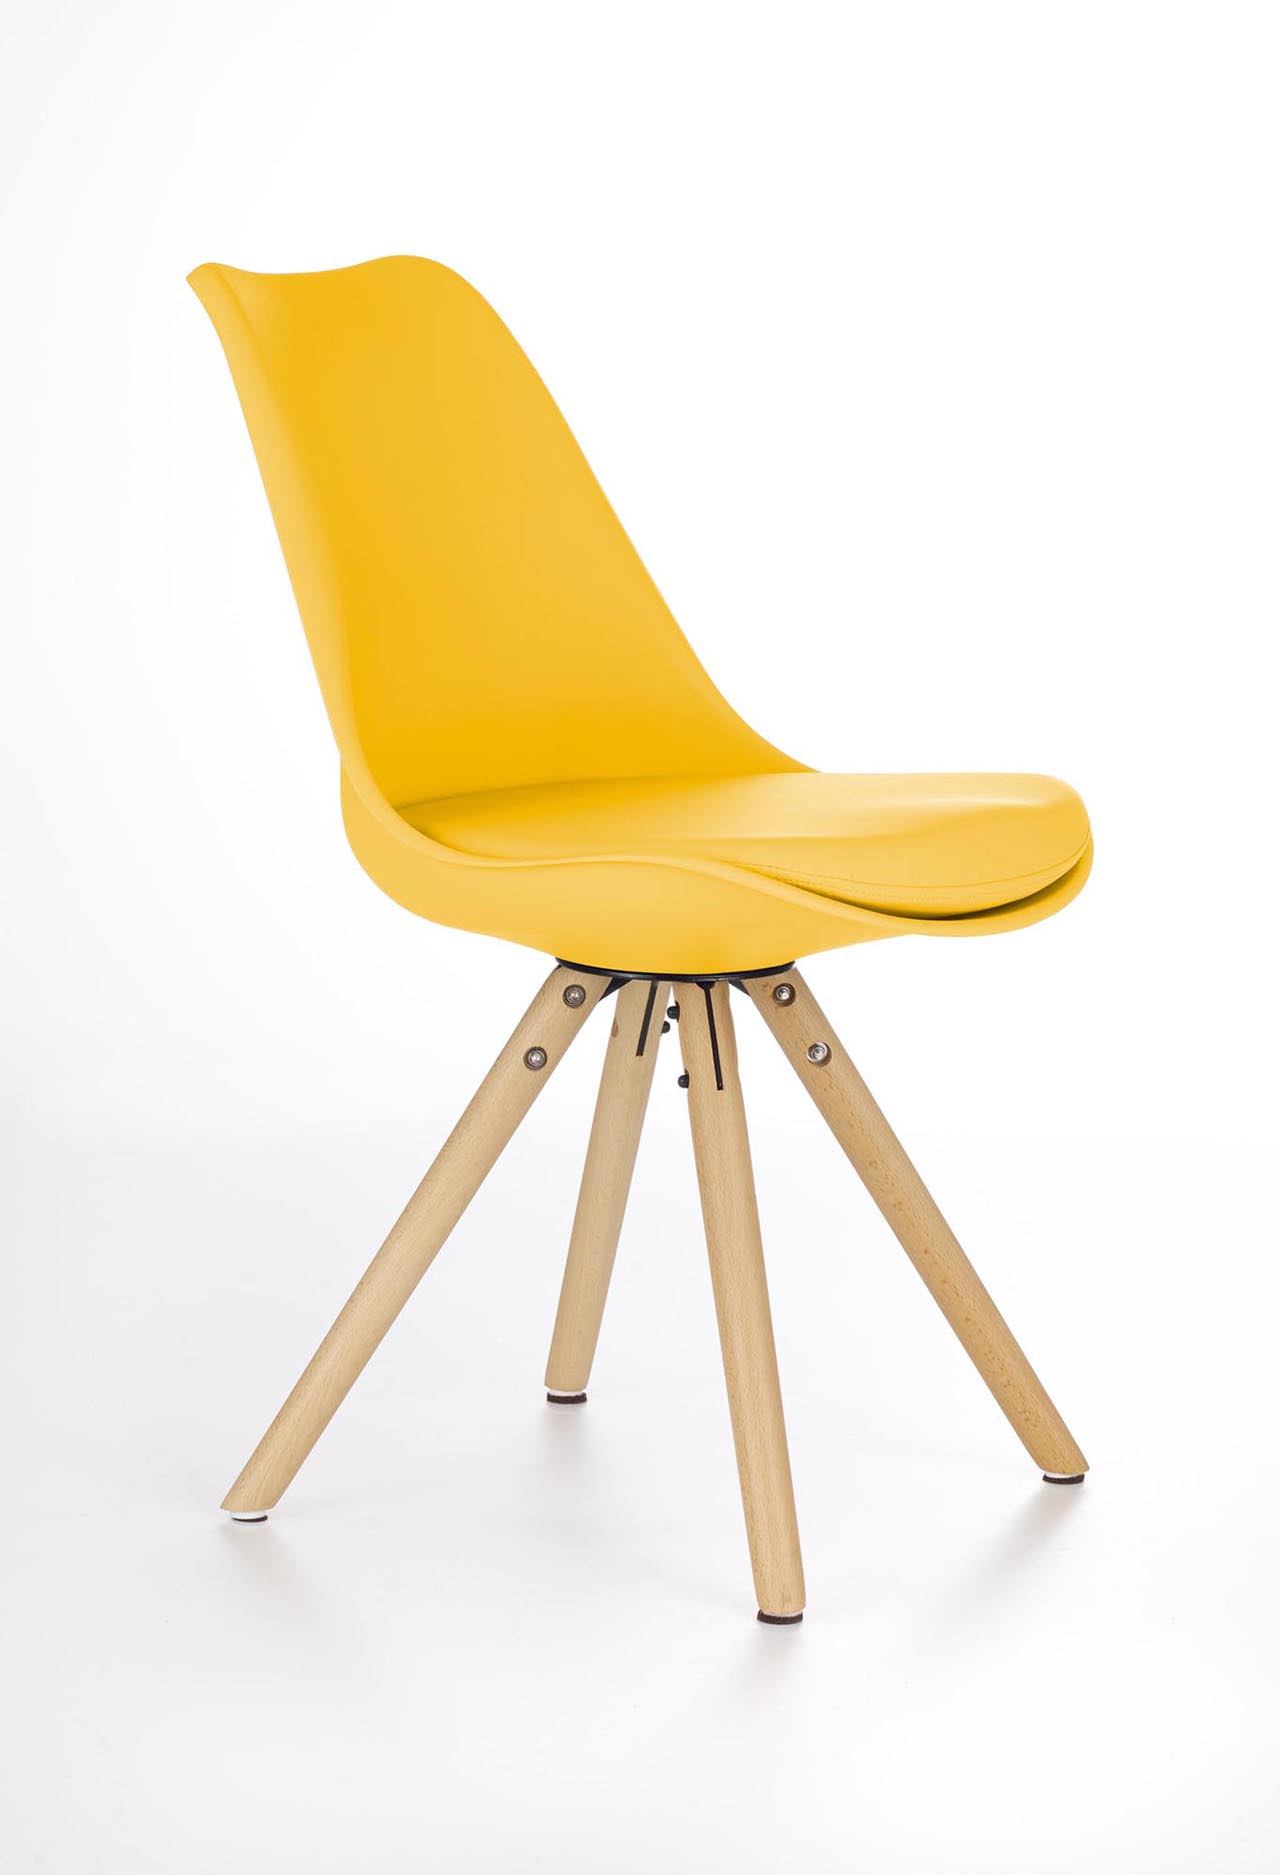 Dining chair K201 yellow